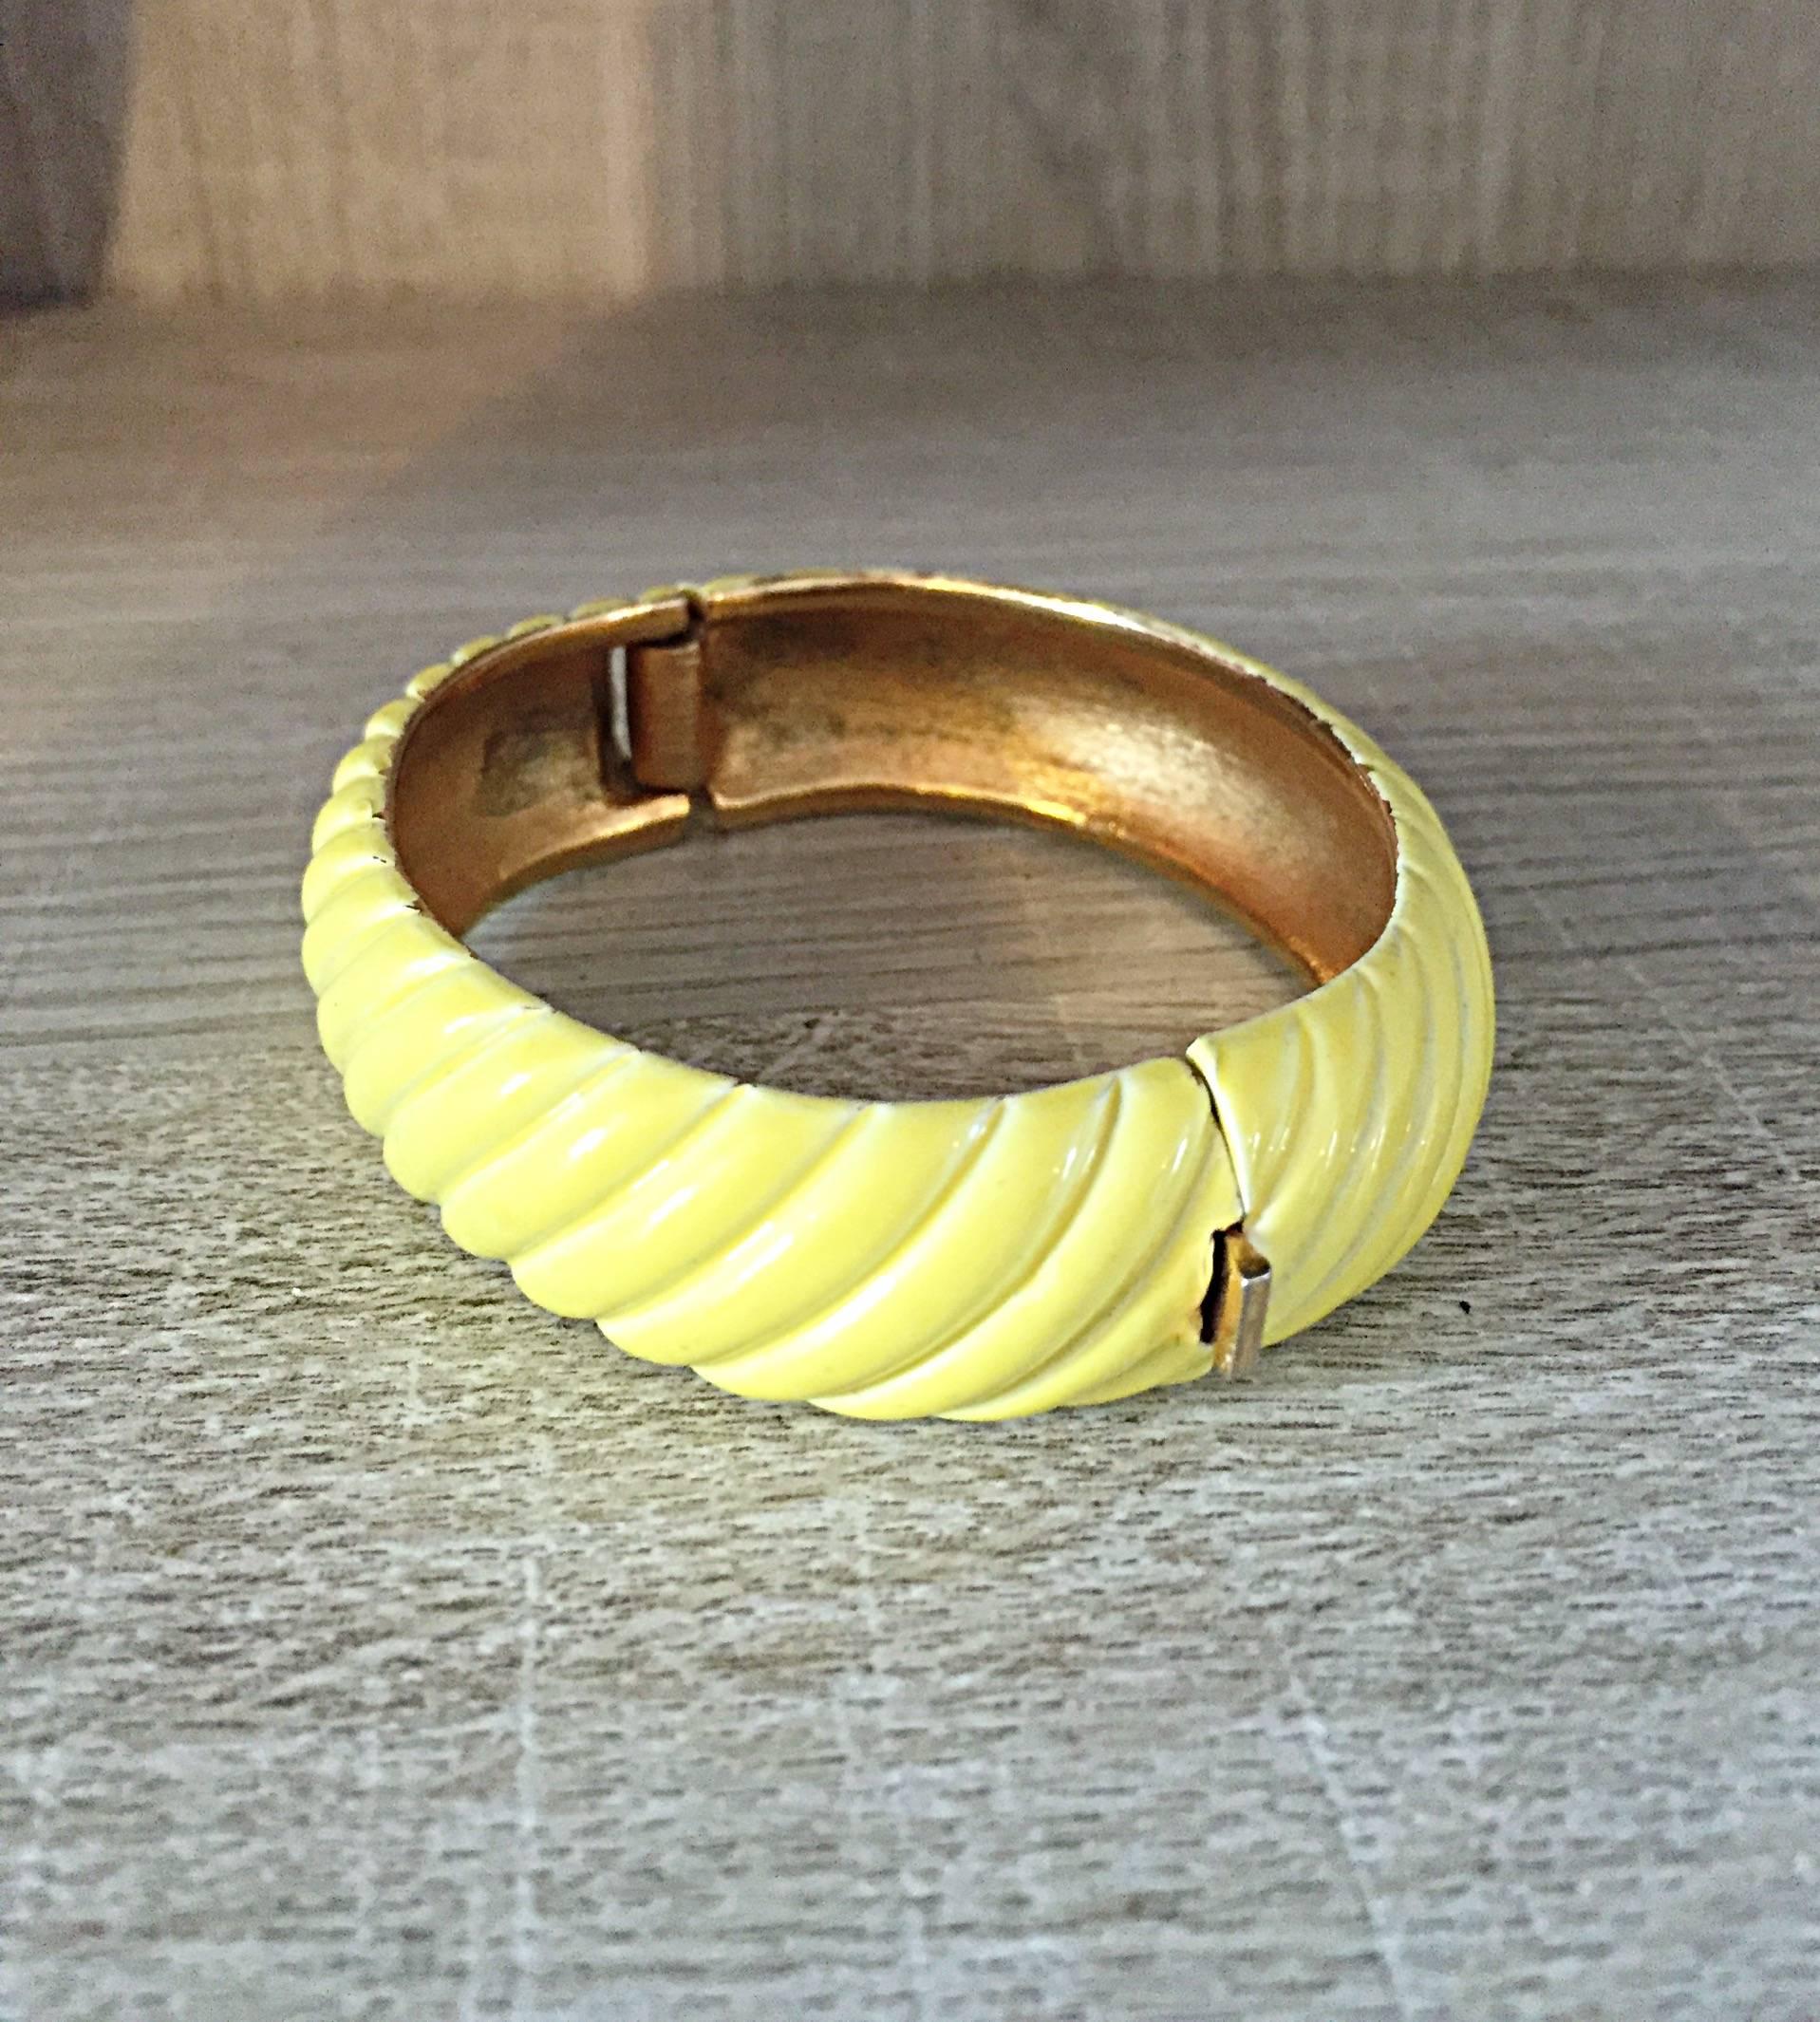 Adorable vintage 1960s TRIFARI canary yellow and gold etched bracelet! Features slanted etching throughout. Hinged closure. Interior is a beautiful gold. Can easily be dressed up or down. Looks great alone or layered with other bracelets. In great